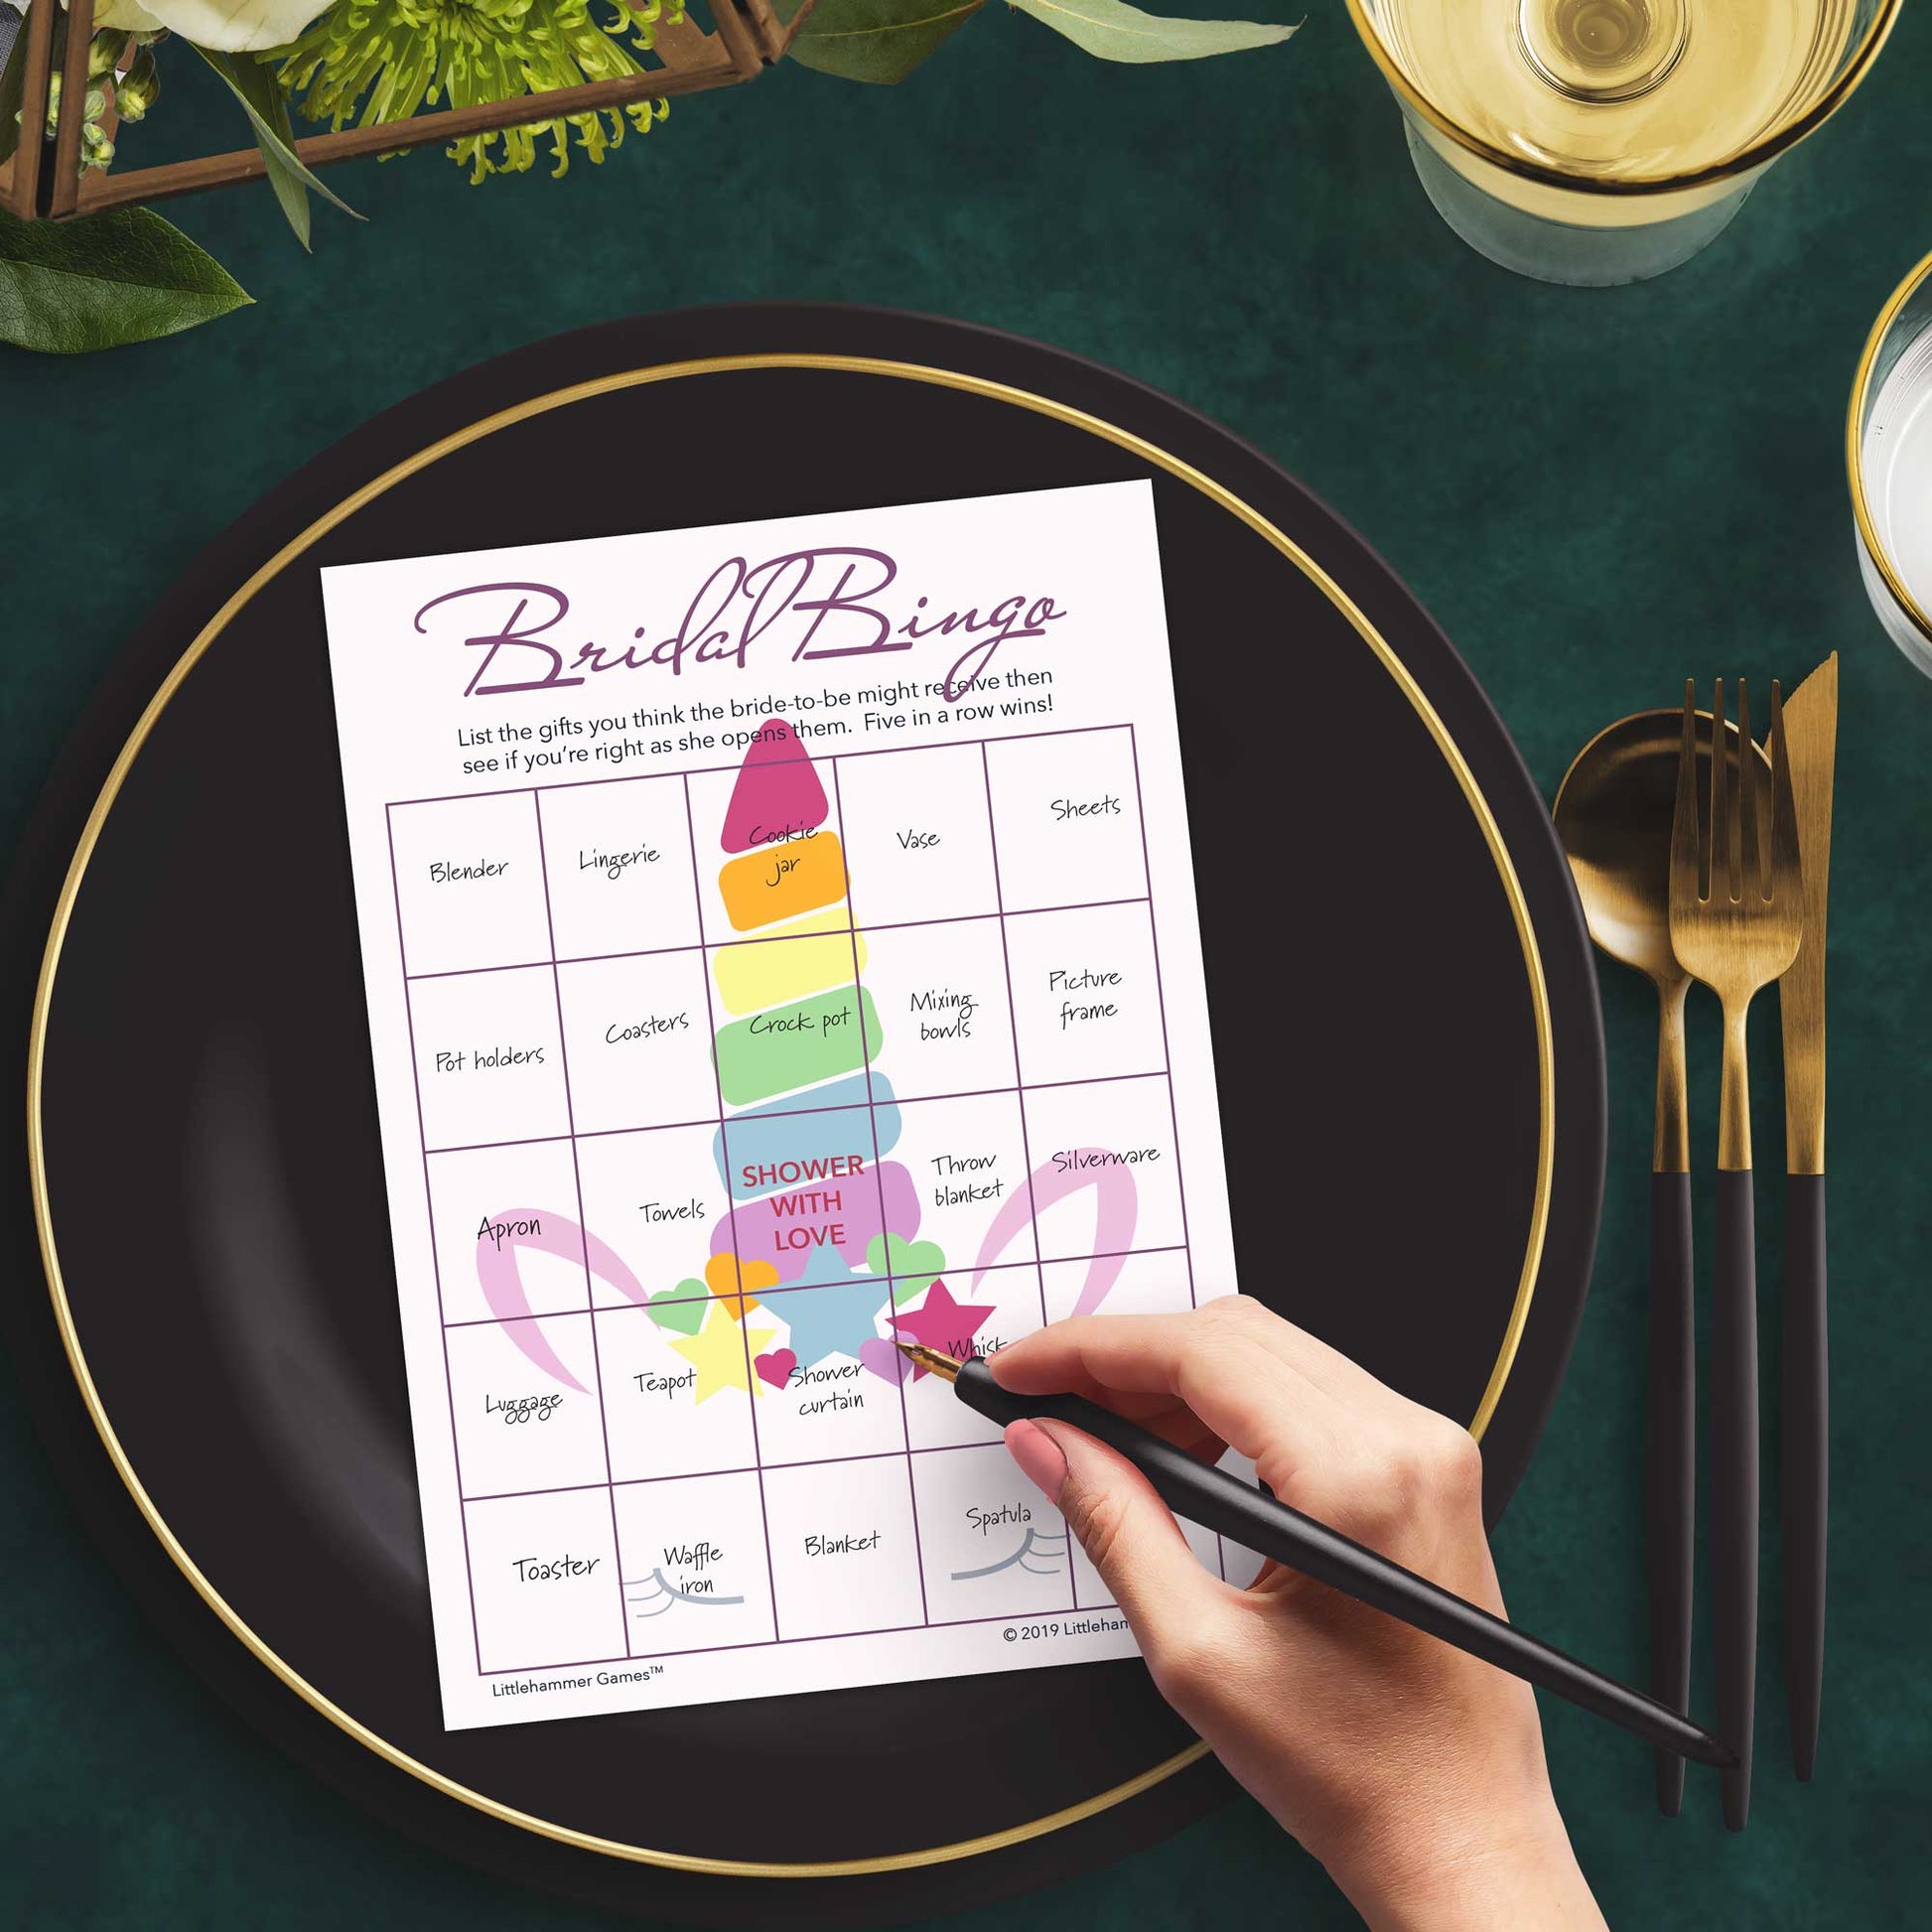 Woman with a pen sitting at a dark place setting with a black and gold plate filling out a unicorn-themed Bridal Gift Bingo card